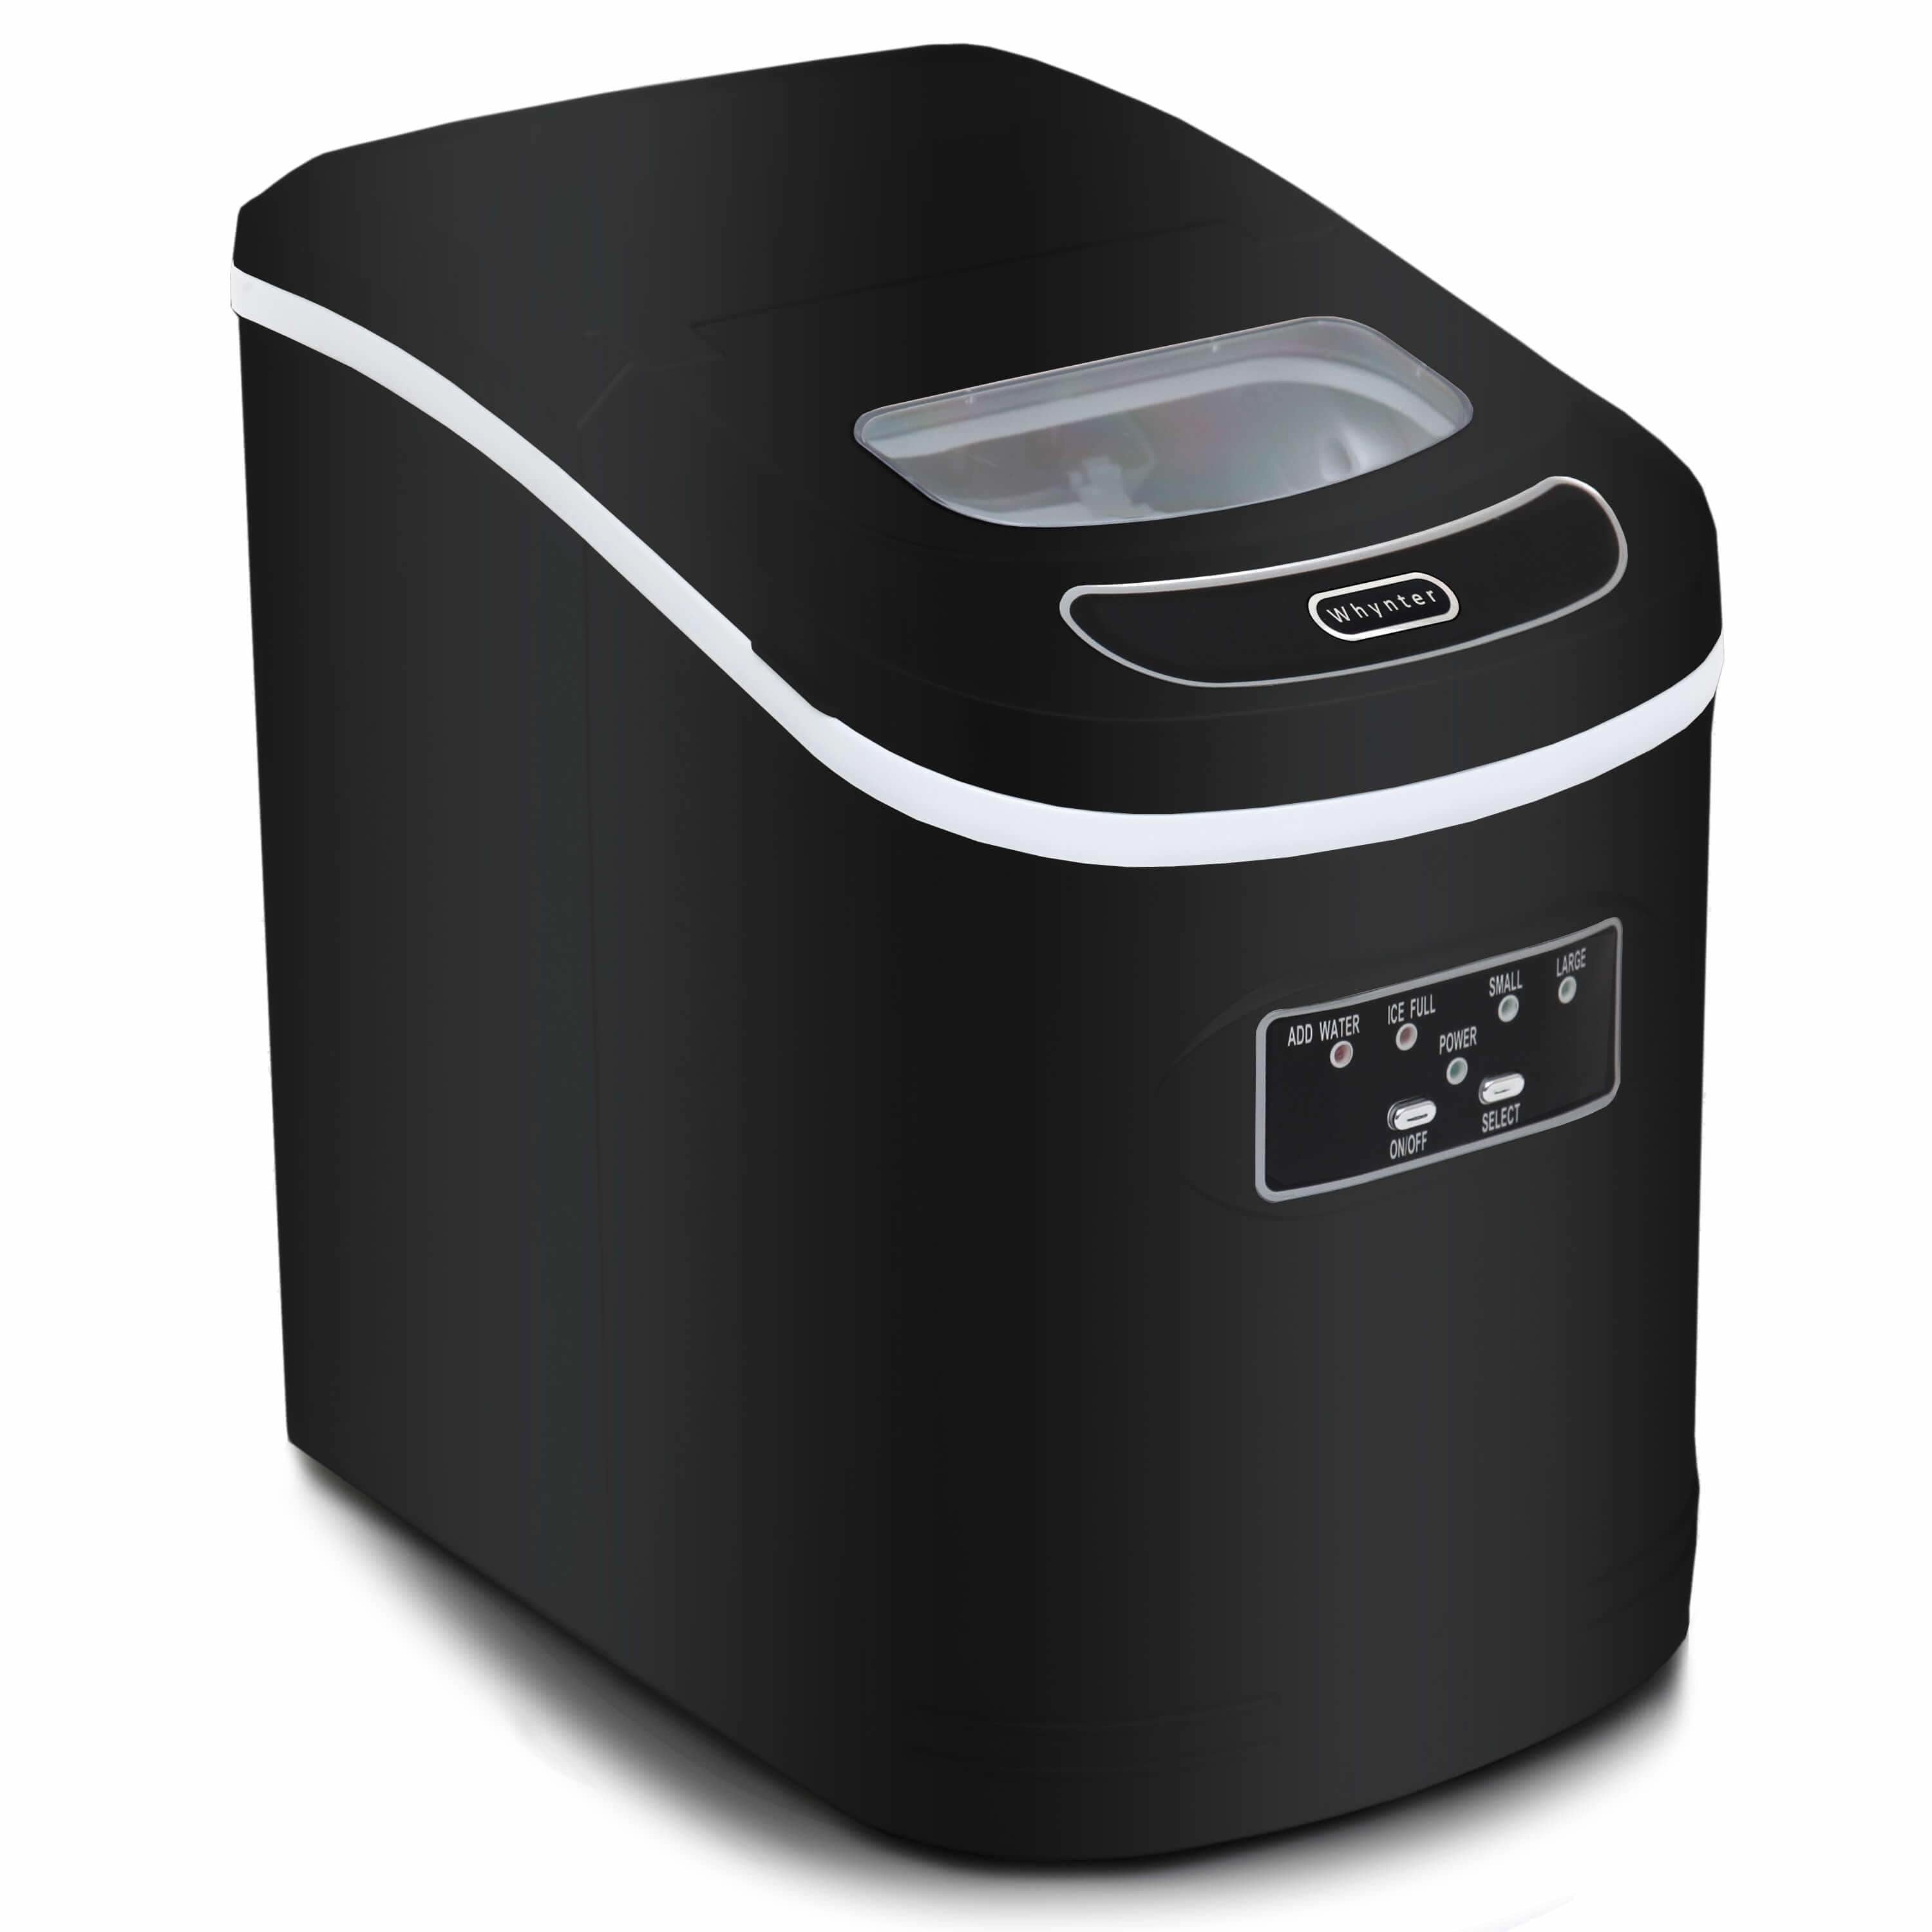 Whynter Compact Portable Ice Maker 27 lb capacity Black IMC-270MB Wine Coolers Empire